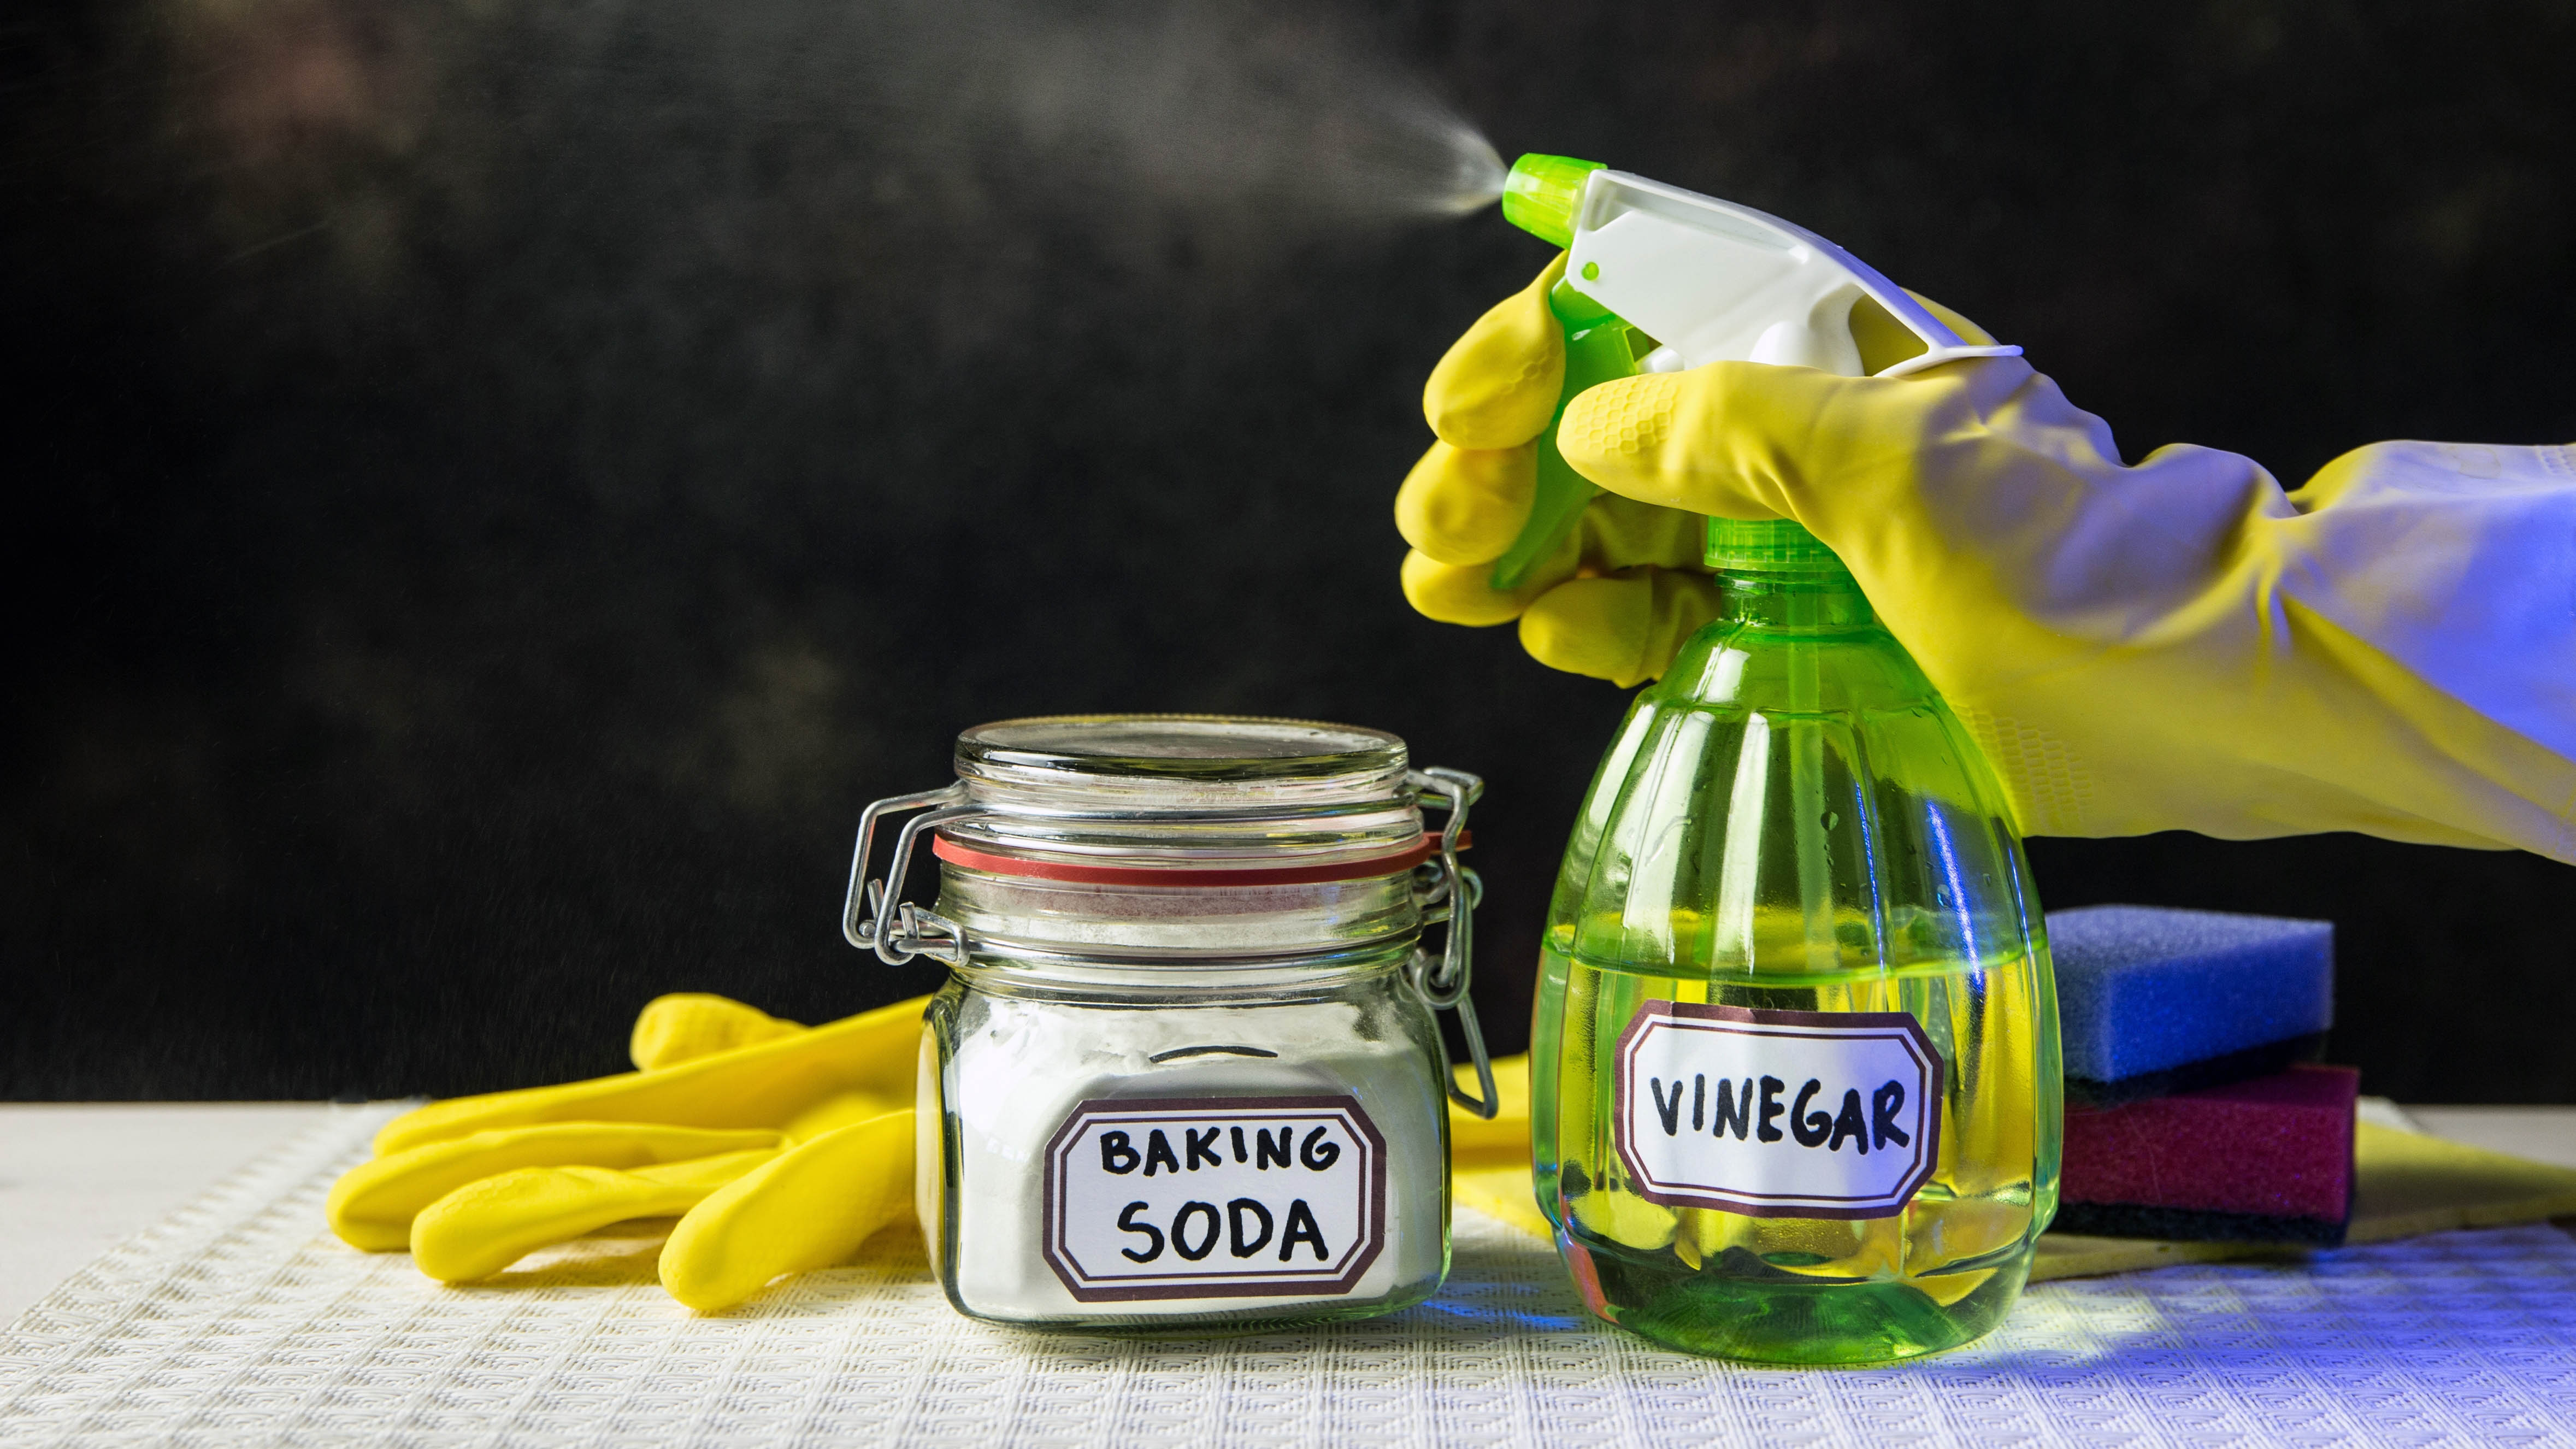 Bleach and Vinegar: Effective Cleaning Tools That Turn Lethal Together